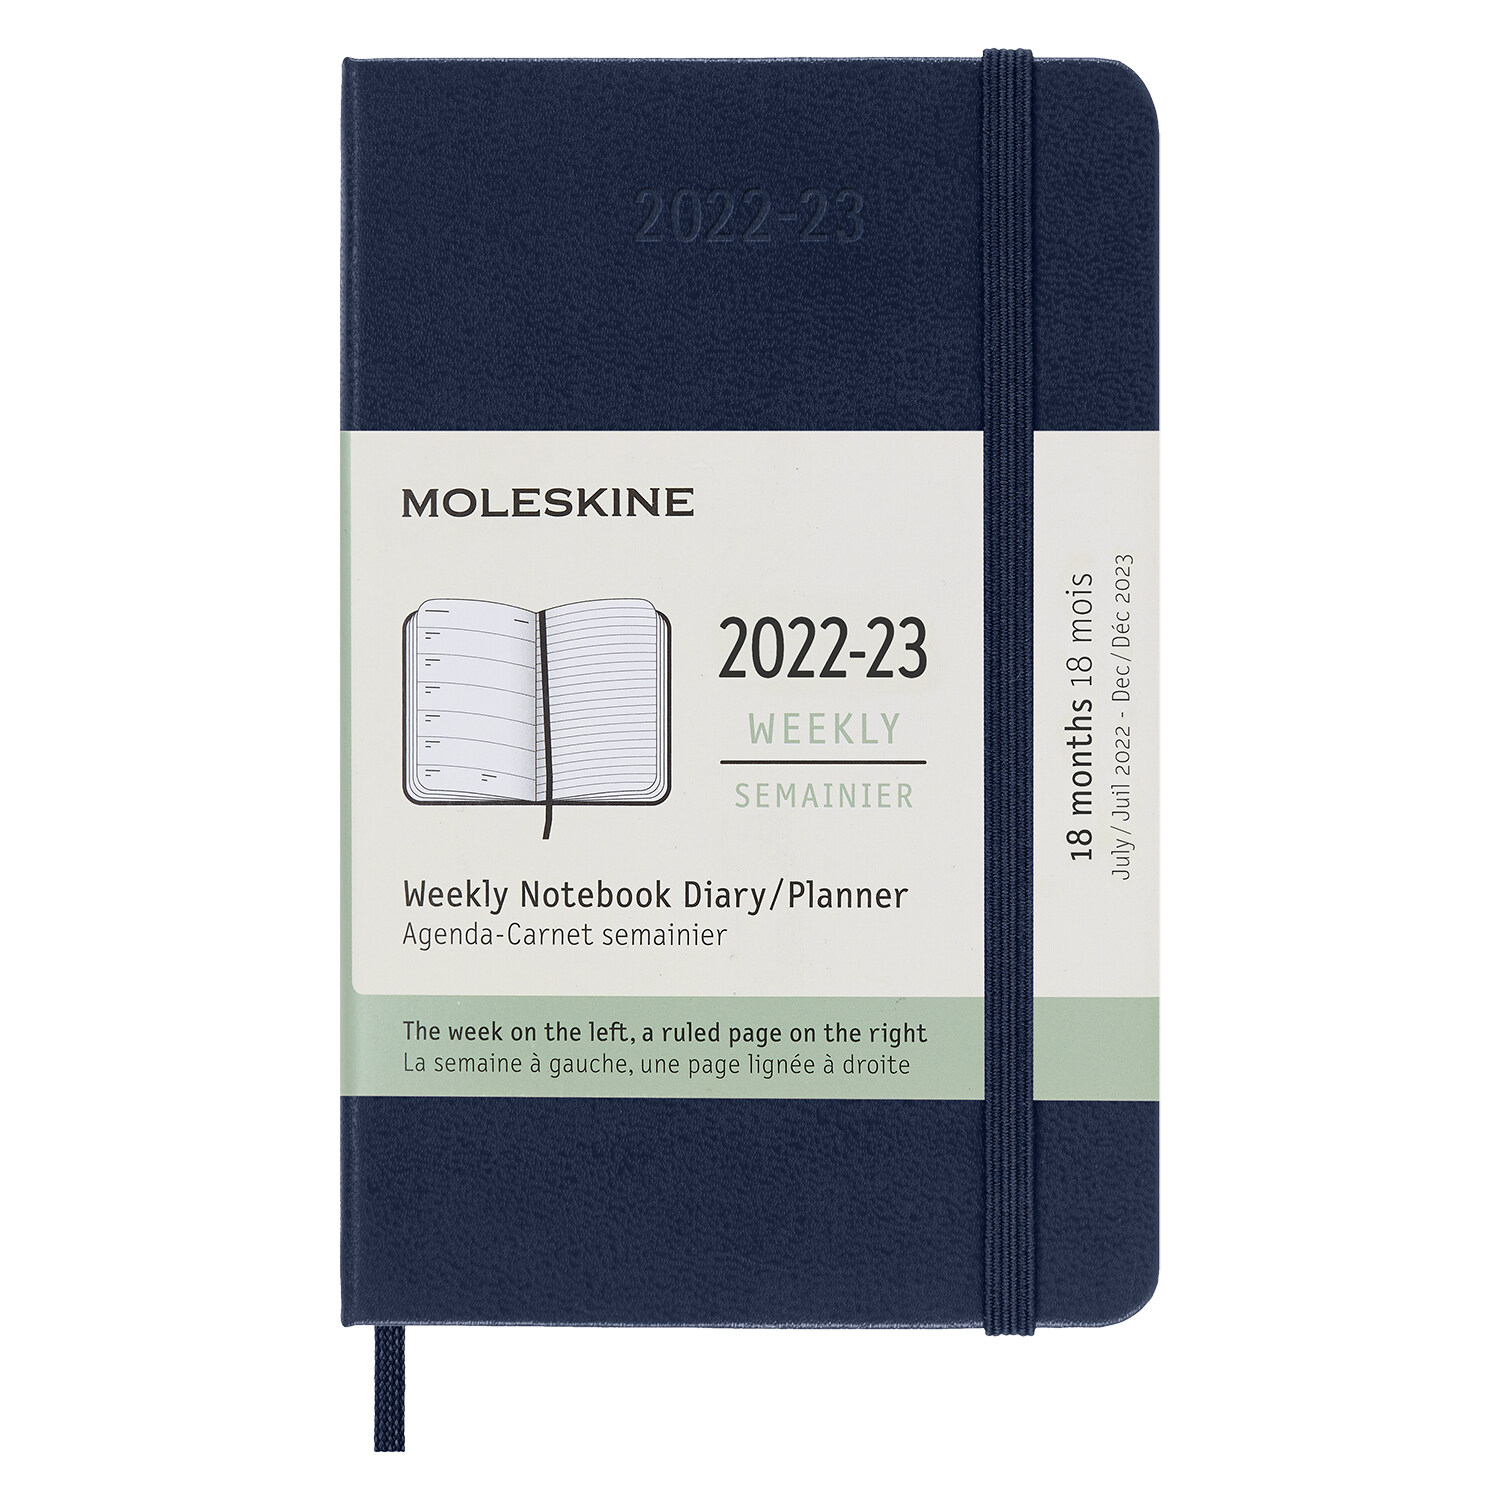 Moleskine 2023 Weekly Notebook Planner, 18m, Pocket, Saphire Blue, Hard Cover (3.5 X 5.5) (Other)